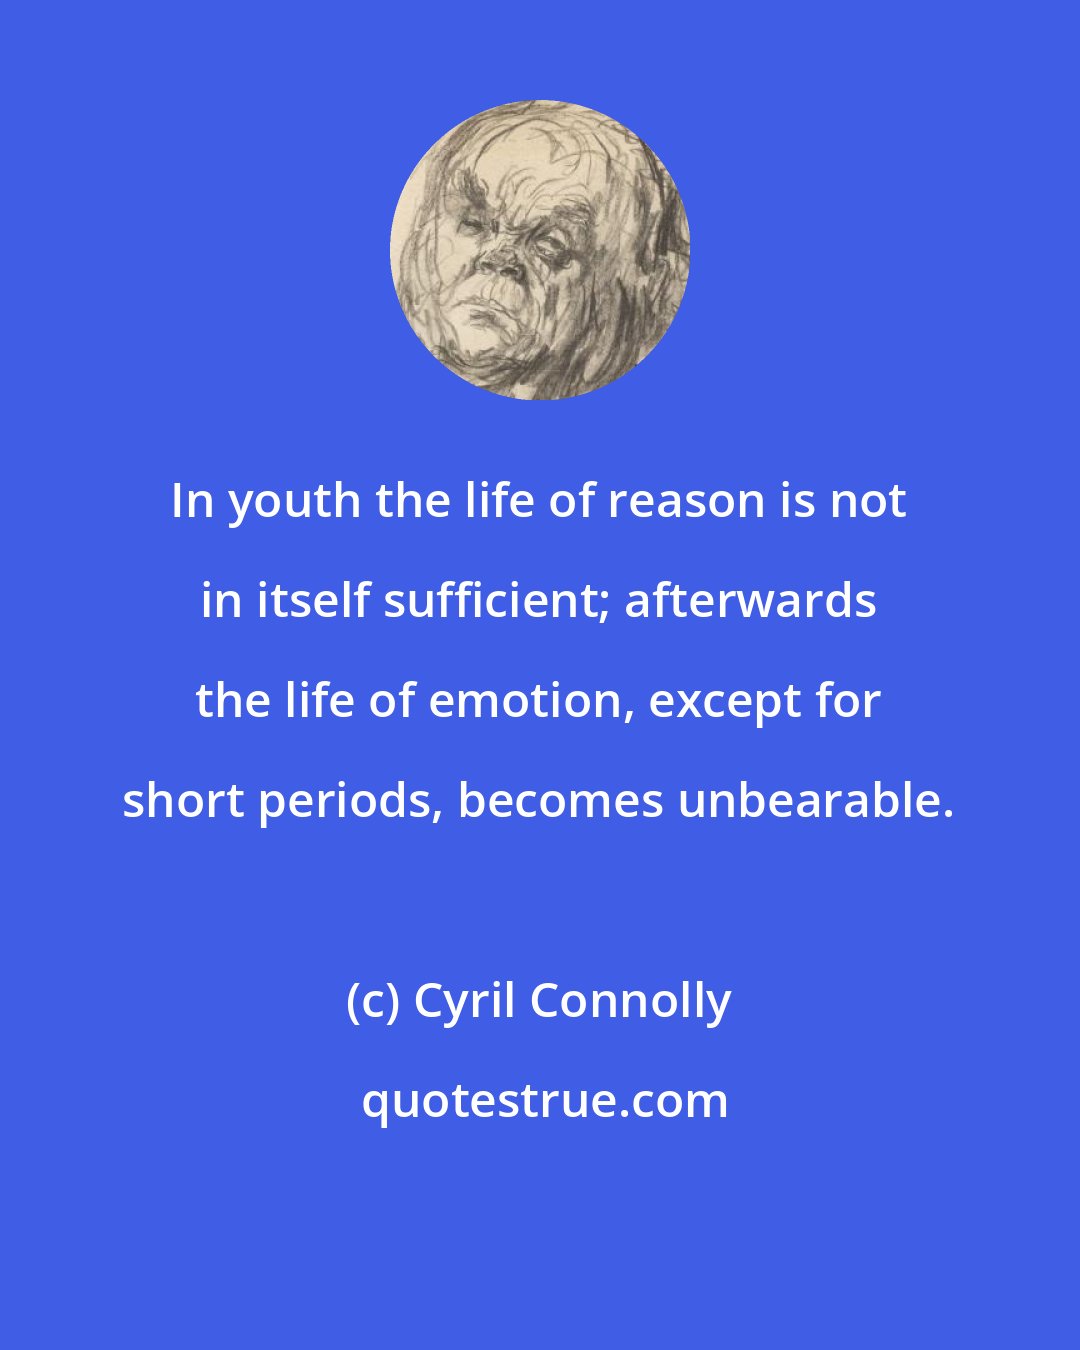 Cyril Connolly: In youth the life of reason is not in itself sufficient; afterwards the life of emotion, except for short periods, becomes unbearable.